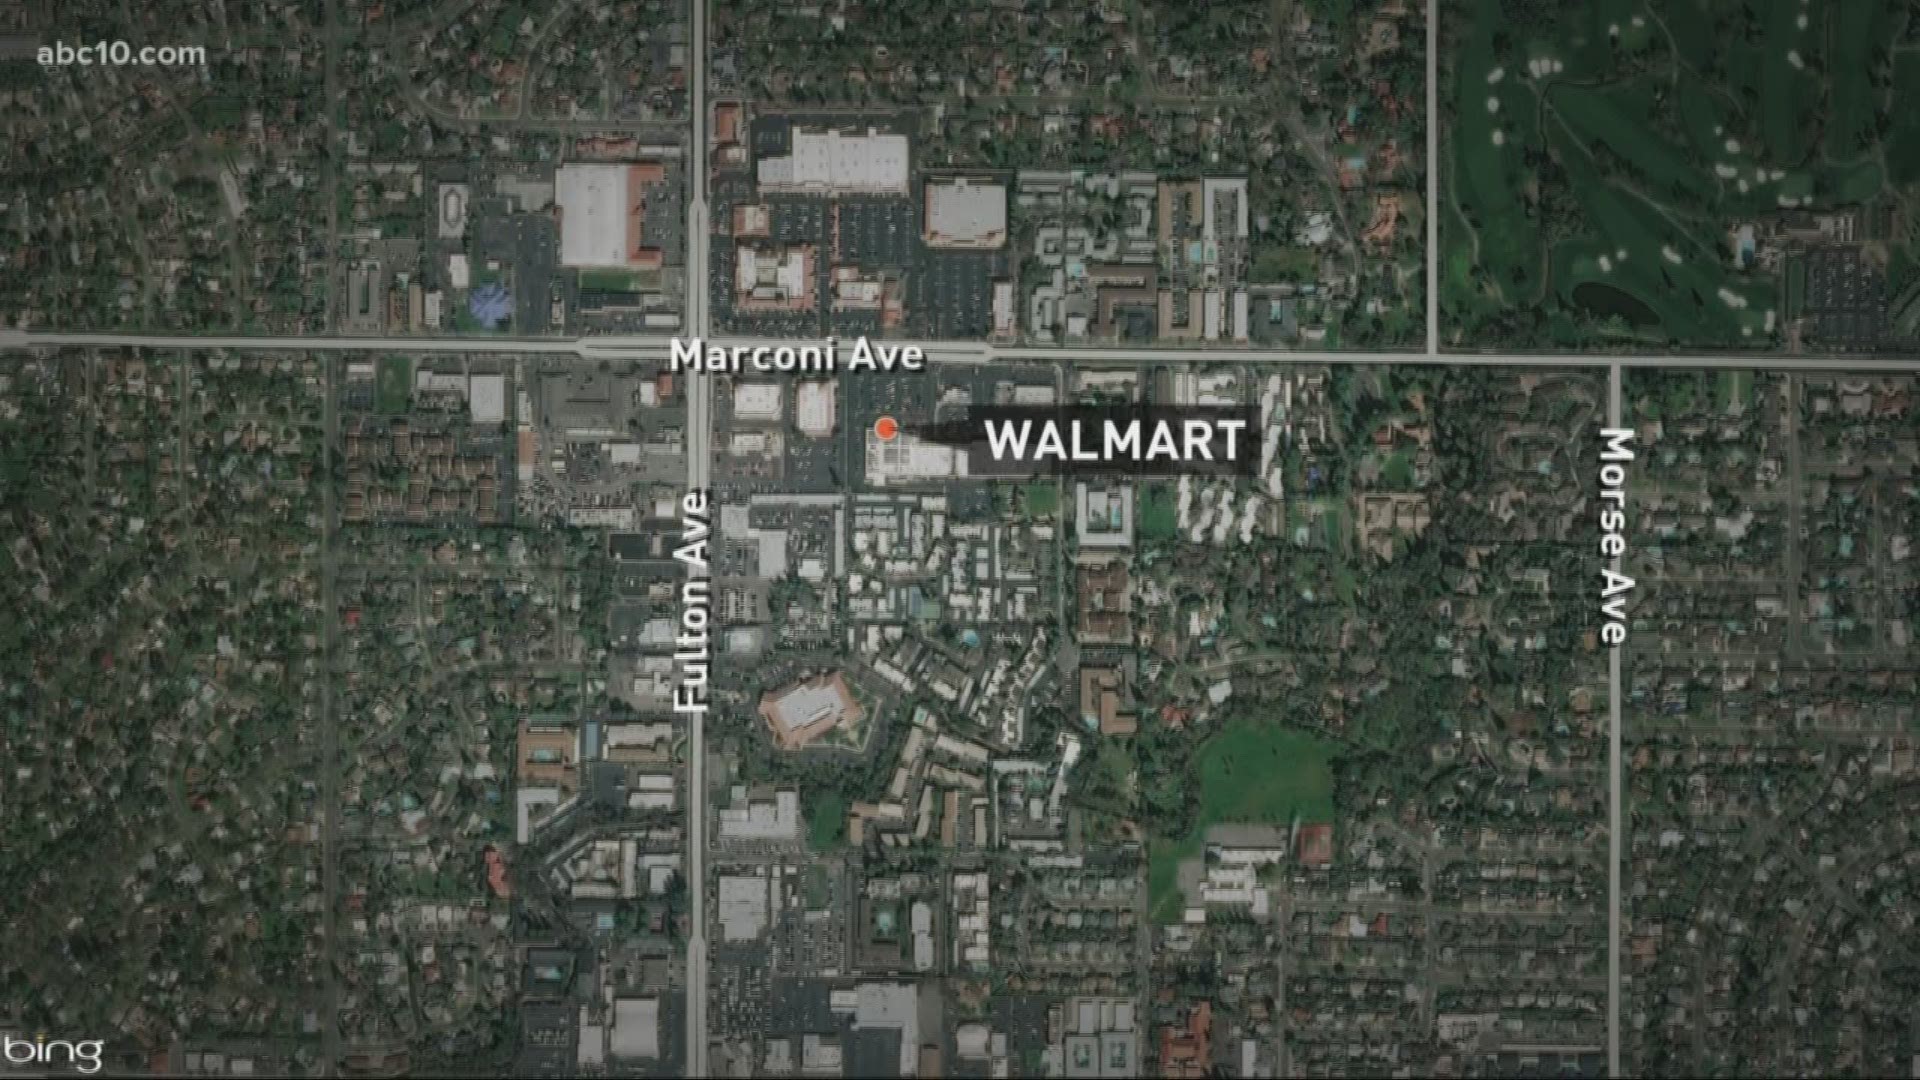 A suspicious death investigation is underway at a Sacramento Walmart after an employee collapsed and later died at the hospital, according to the Sacramento County Sheriff's Department.